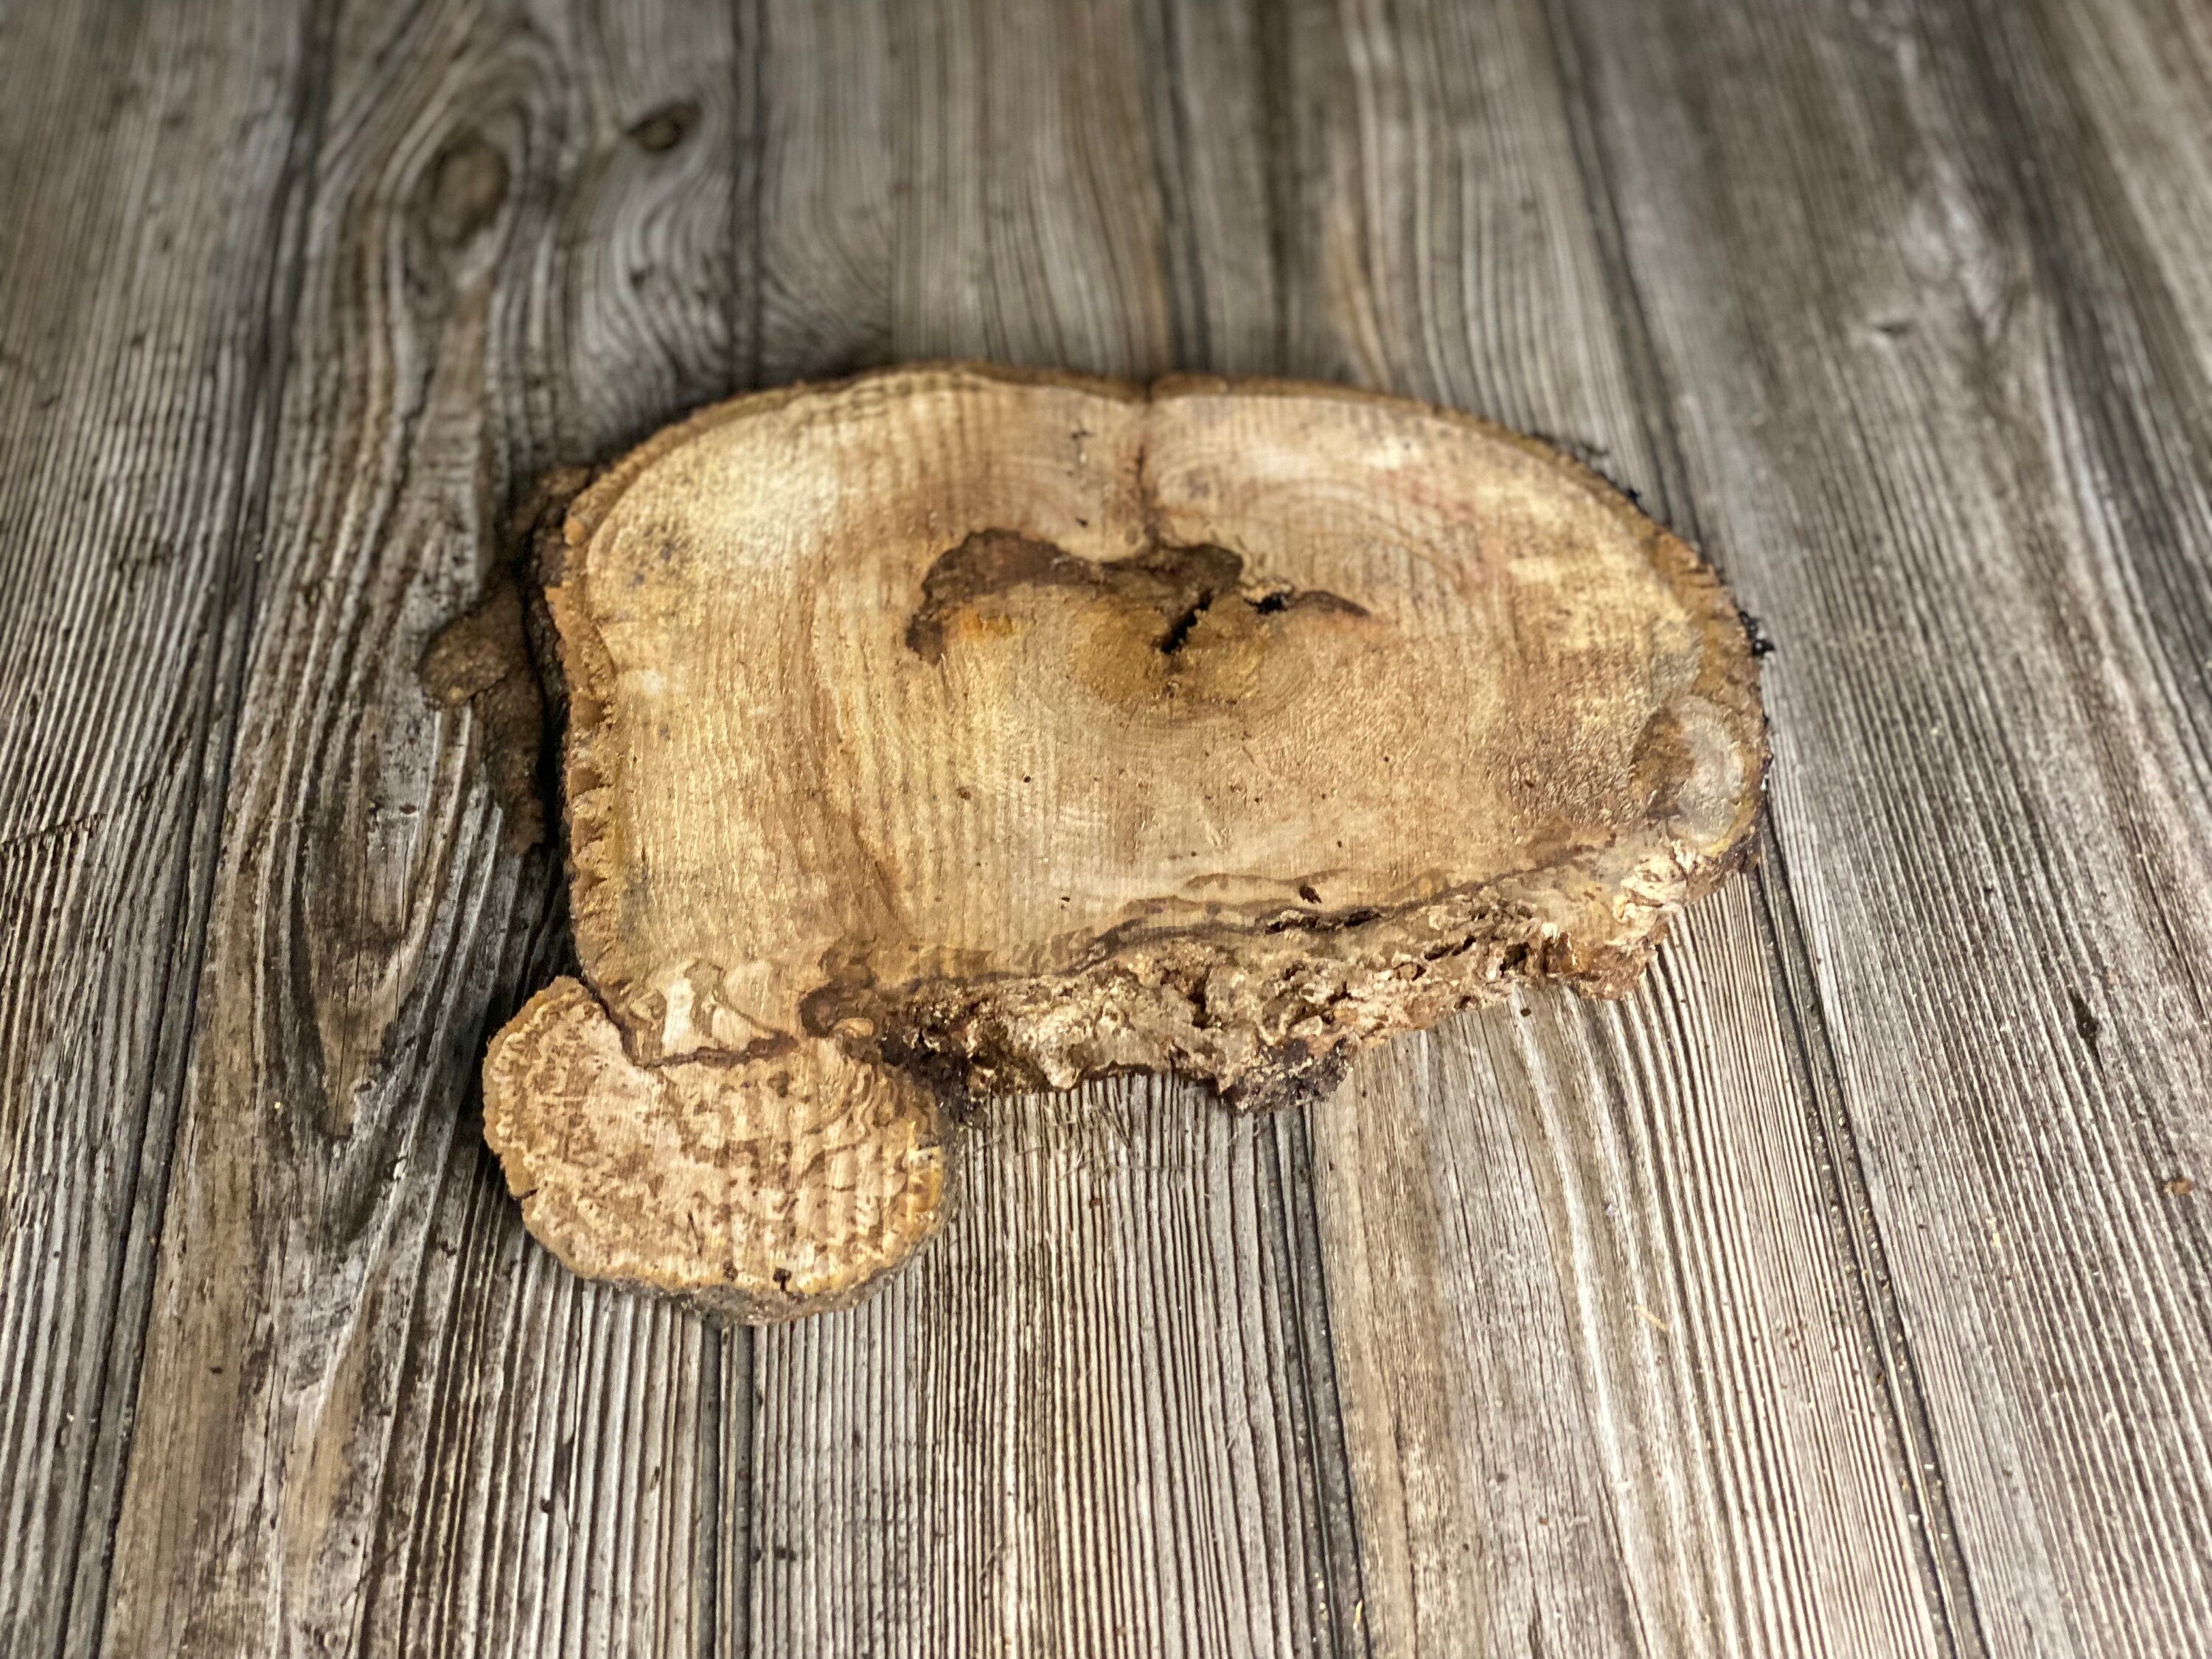 Hickory Burl Slice, Approximately 11 Inches Long by 8 Inches Wide and 3/4 Inch Thick